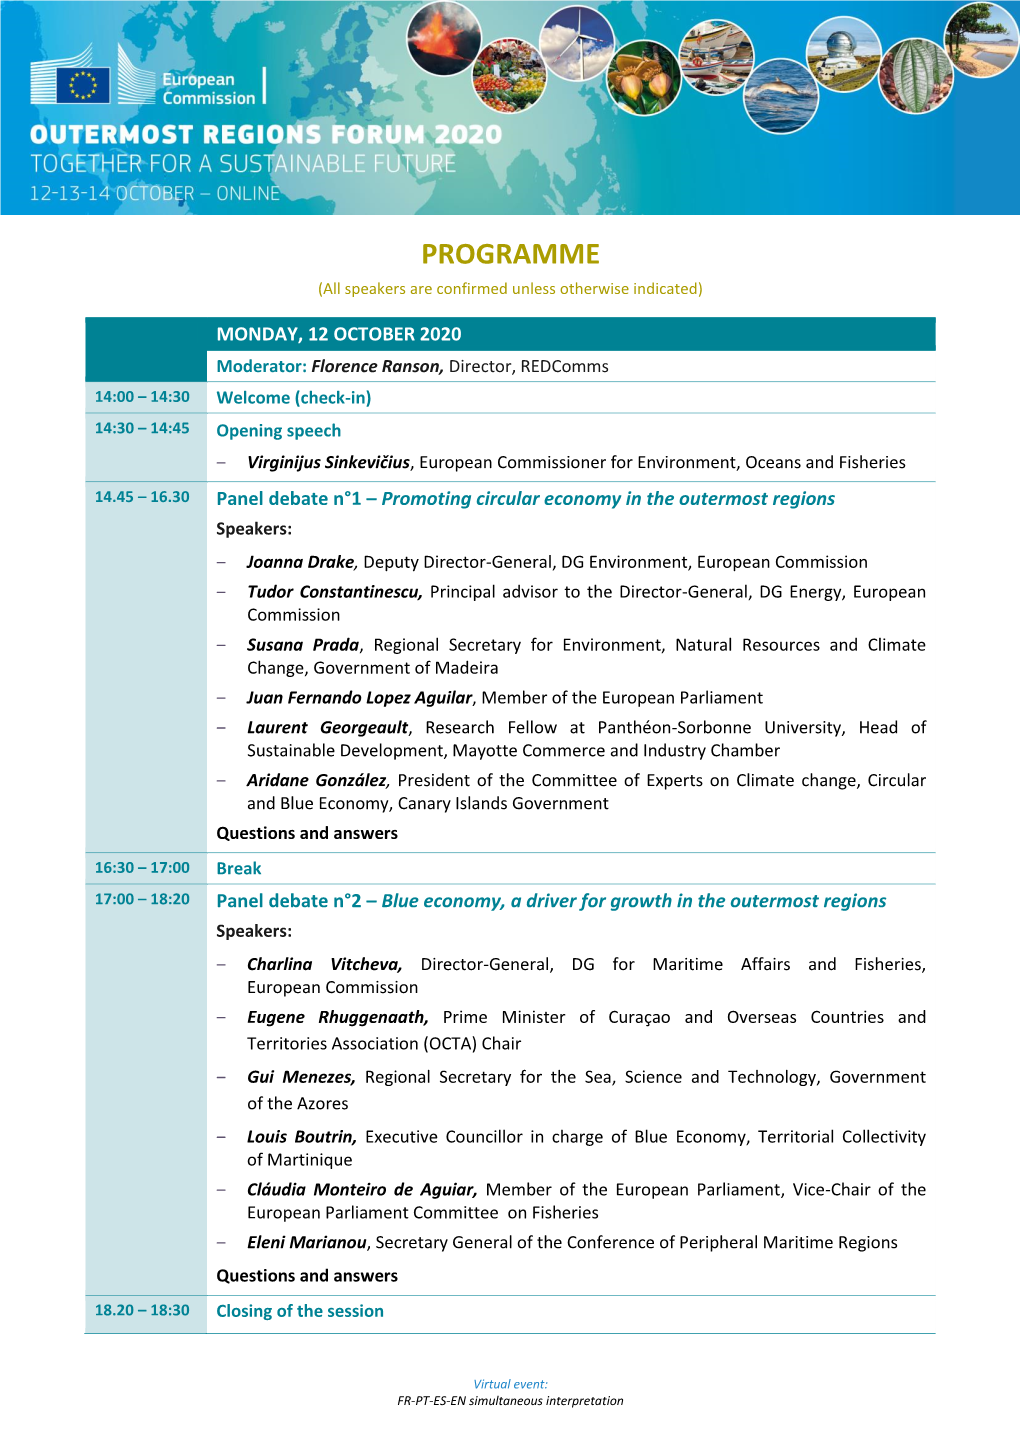 PROGRAMME (All Speakers Are Confirmed Unless Otherwise Indicated)